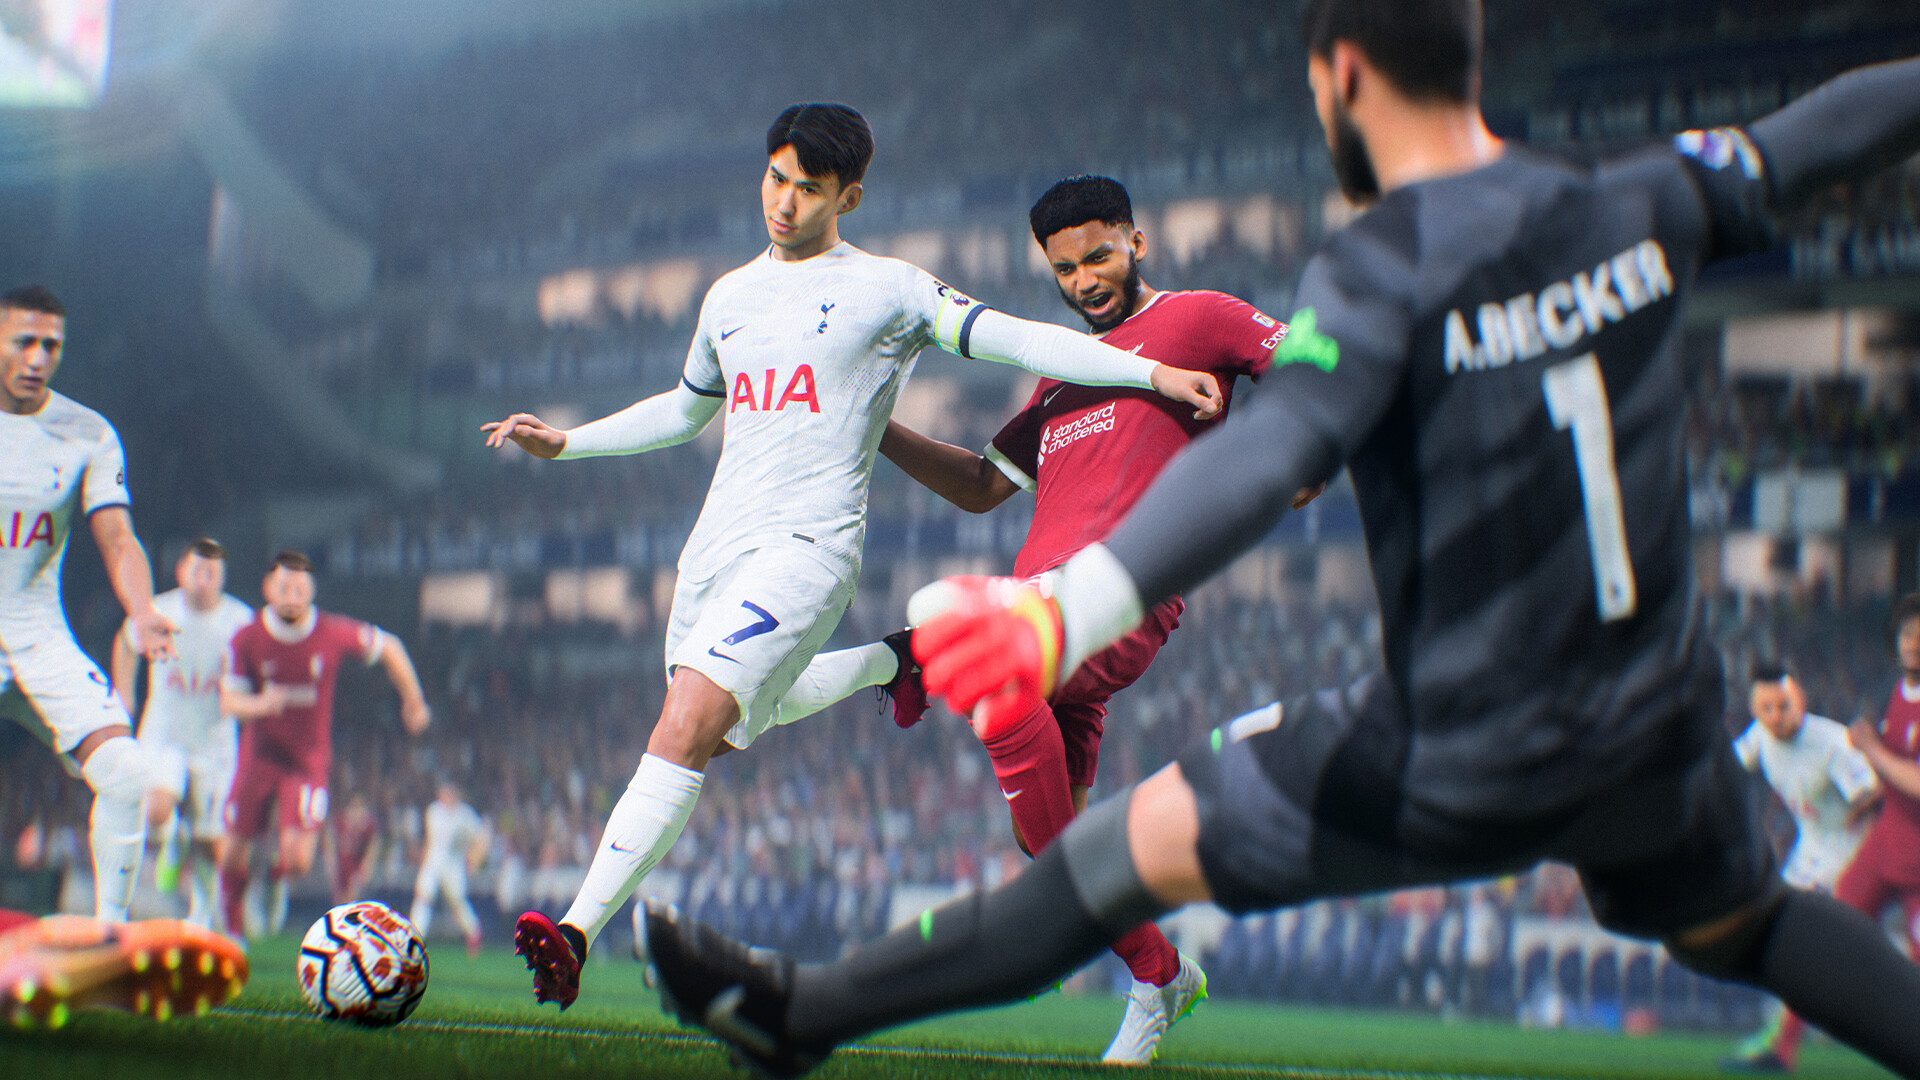 PlayStation Game Size on X: 🚨 EA SPORTS FC 24 BETA - PS4